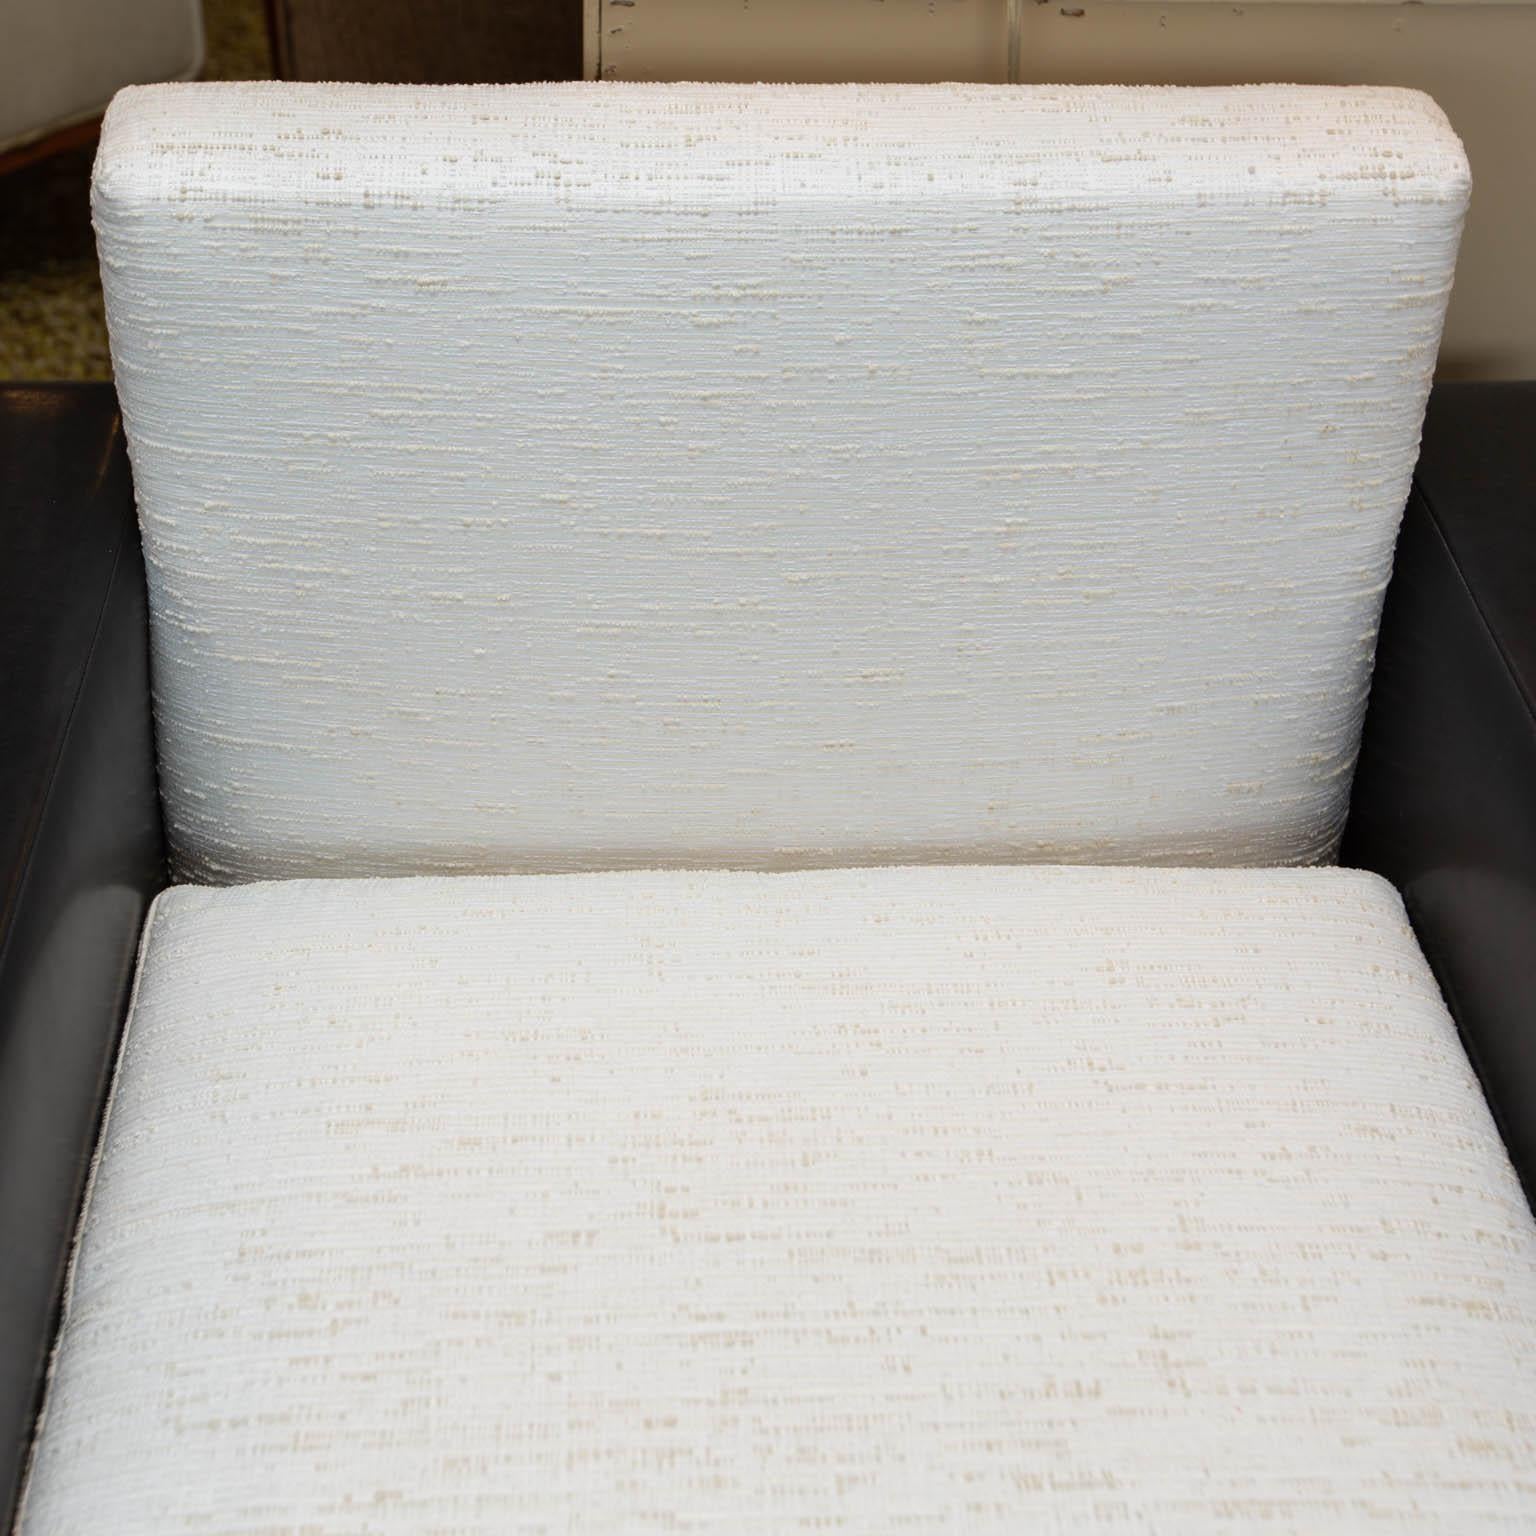 Custom-made set of leather club chairs with cushions and backs upholstered in white raw silk. Great contrast that fits perfectly in today's monochromatic interiors.